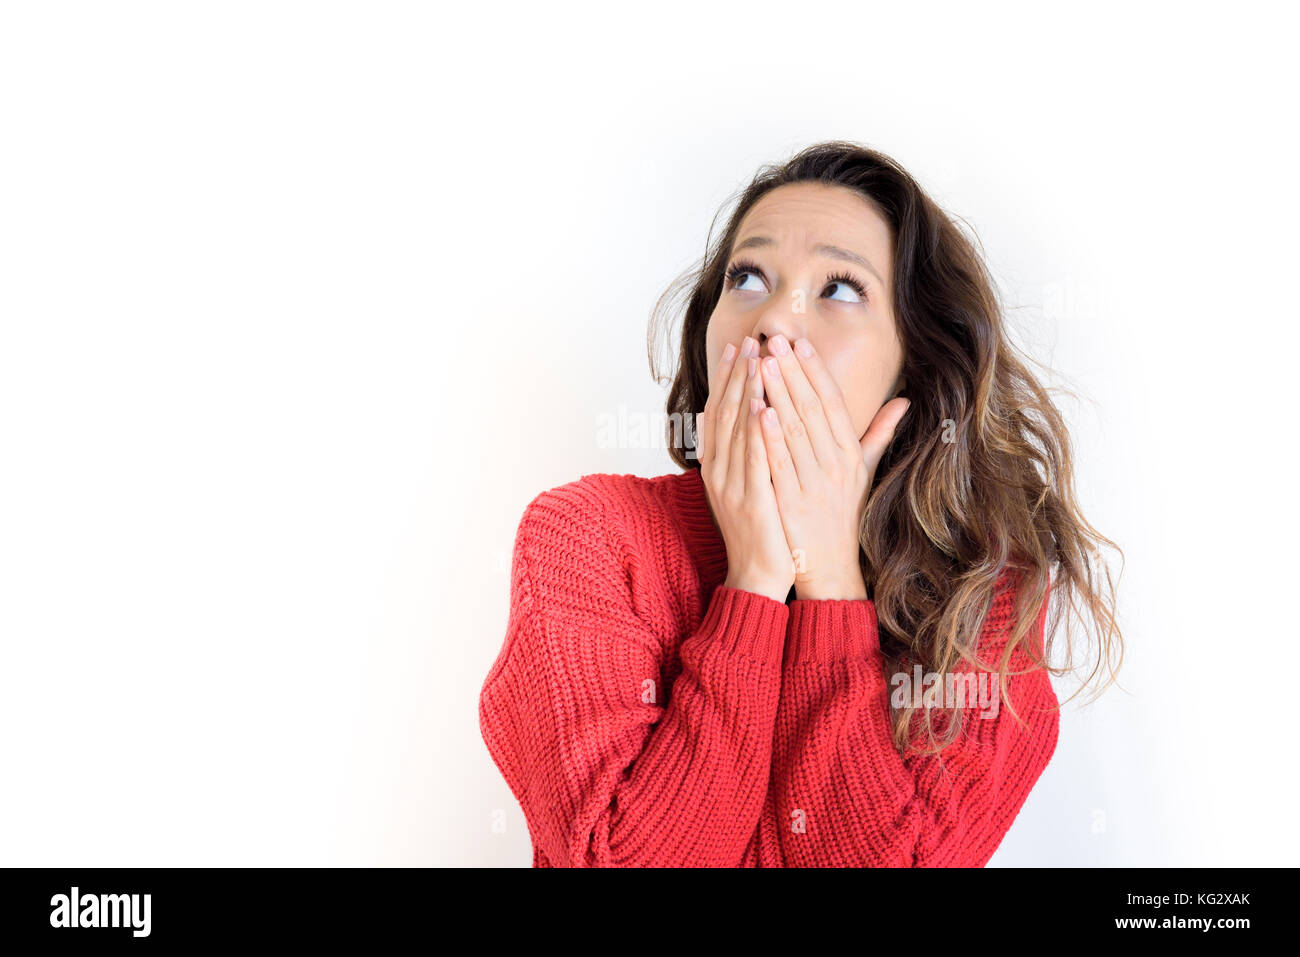 Asian teen woman red dress scared expression with hands over face looking up isolated on white background Stock Photo